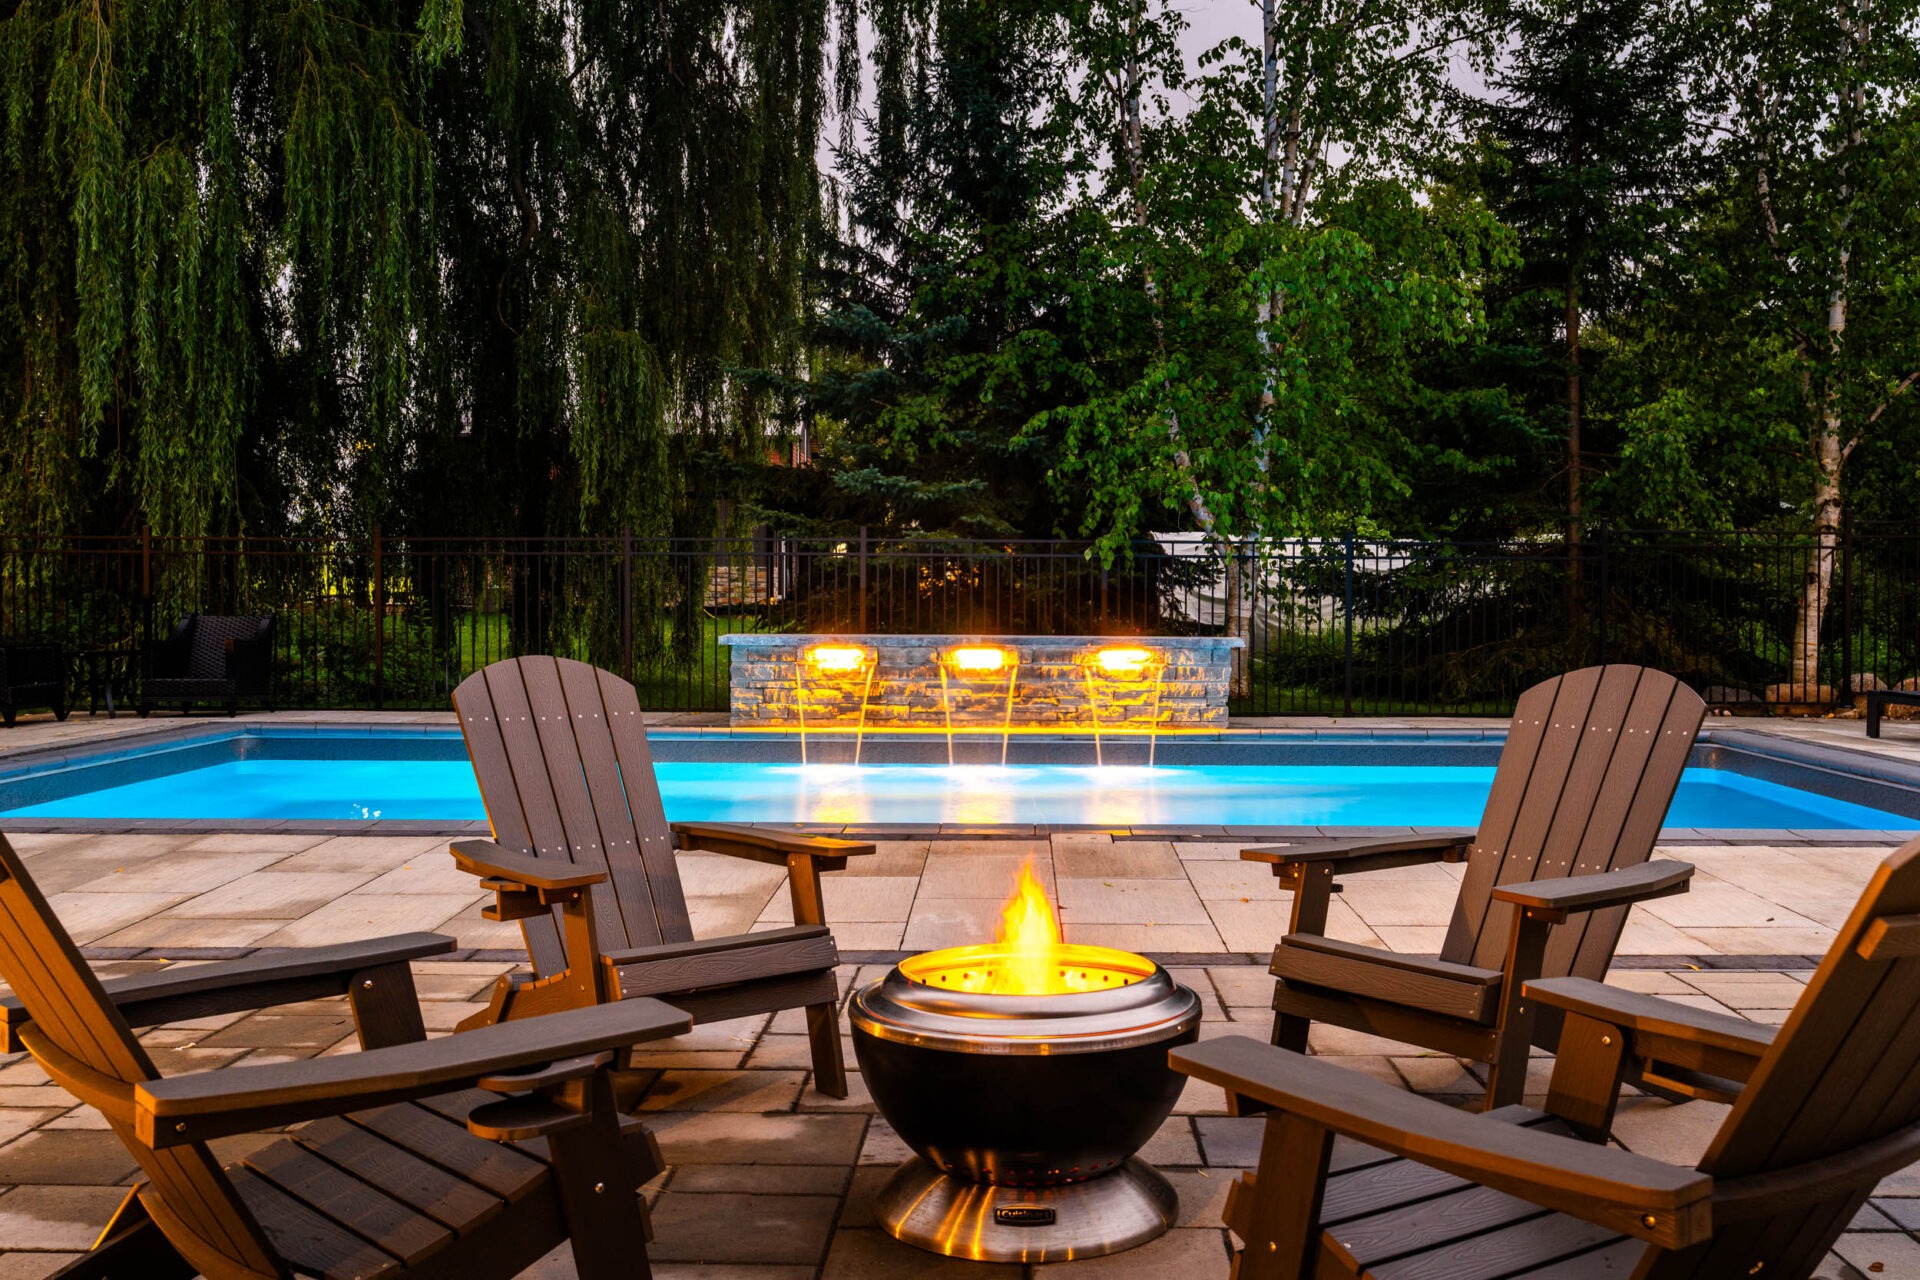 An outdoor setting at twilight with a lit fire pit, Adirondack chairs, a swimming pool and trees in the background, fenced for privacy.